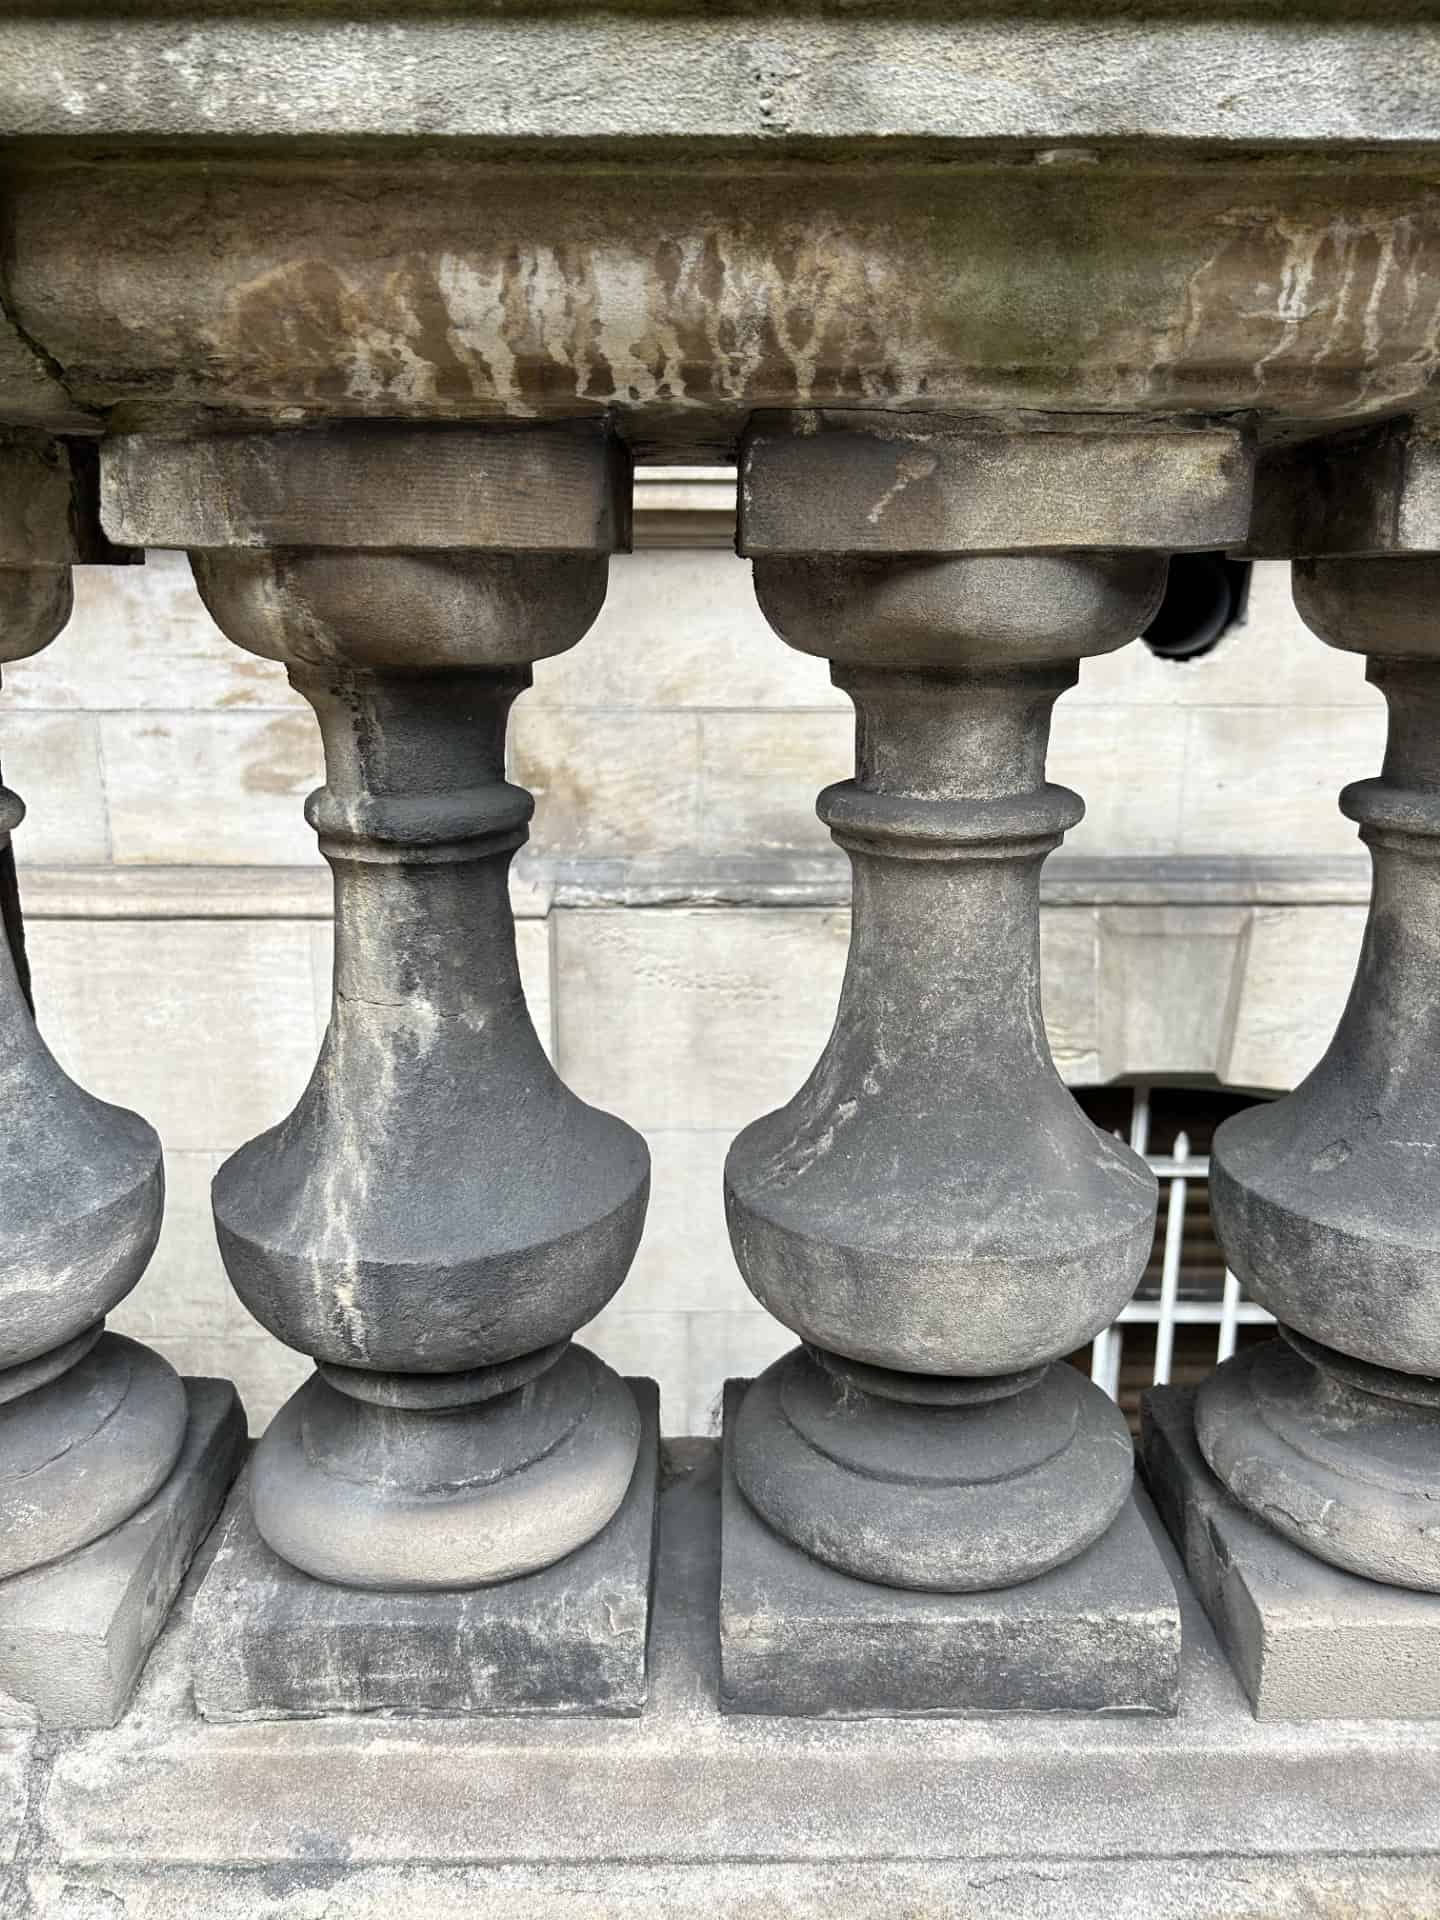 Substantial deterioration, atmospheric, and biologic staining present at the ancaster limestone balustrade affronting the Freemason’s Hall. Photo courtesy Shea McEnerney